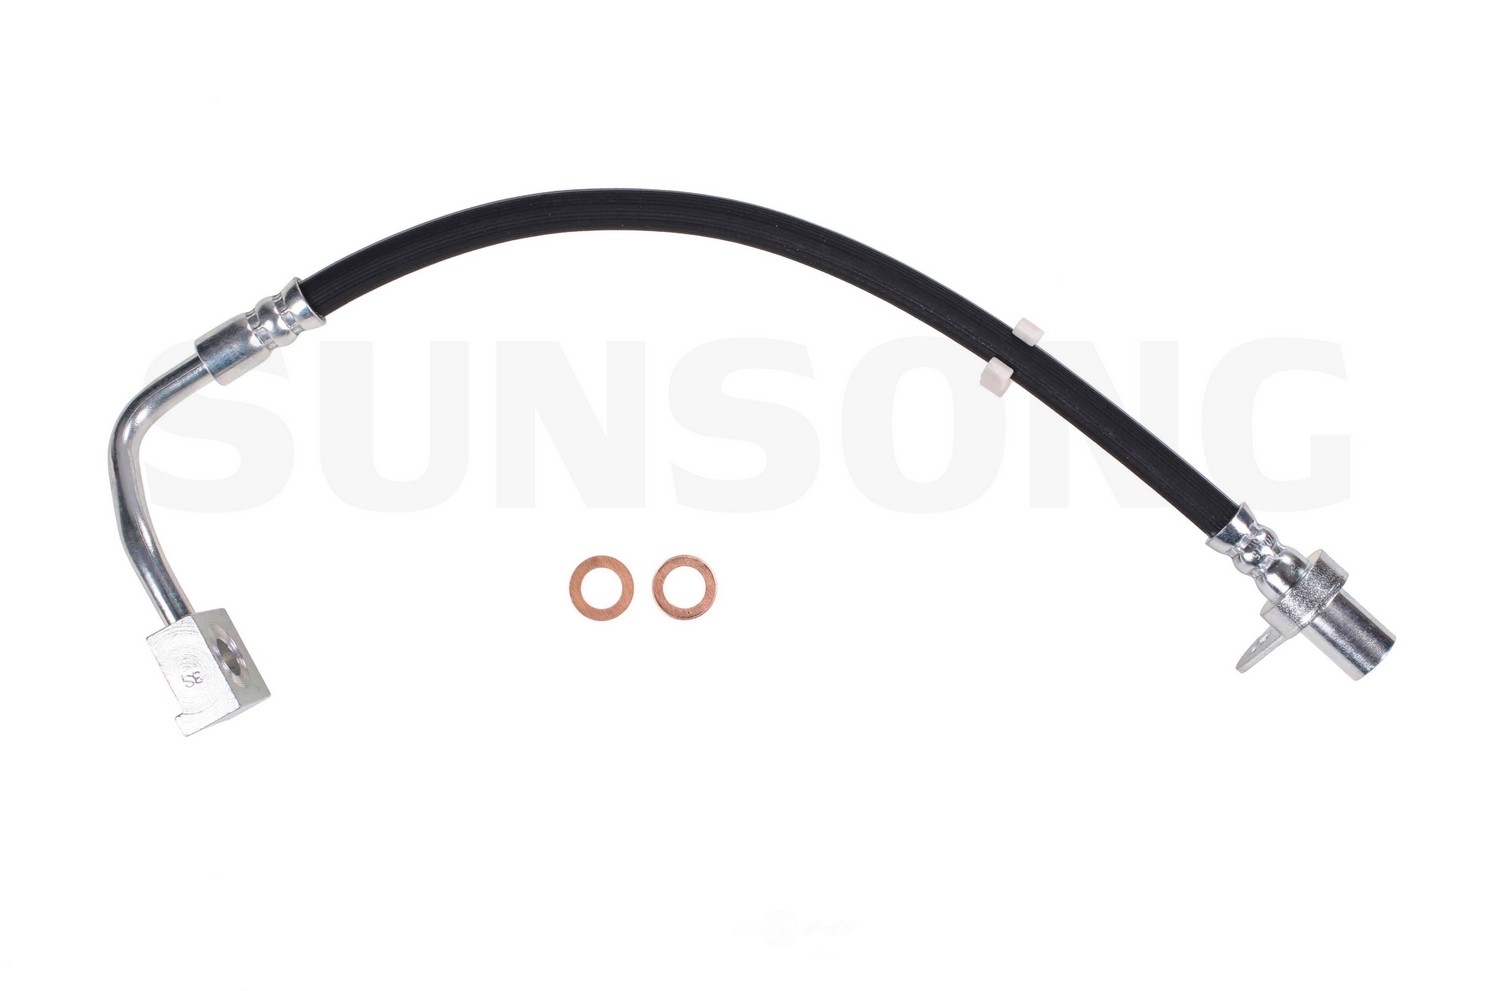 SUNSONG NORTH AMERICA - Brake Hydraulic Hose (With ABS Brakes, Front Left) - SUG 2205303